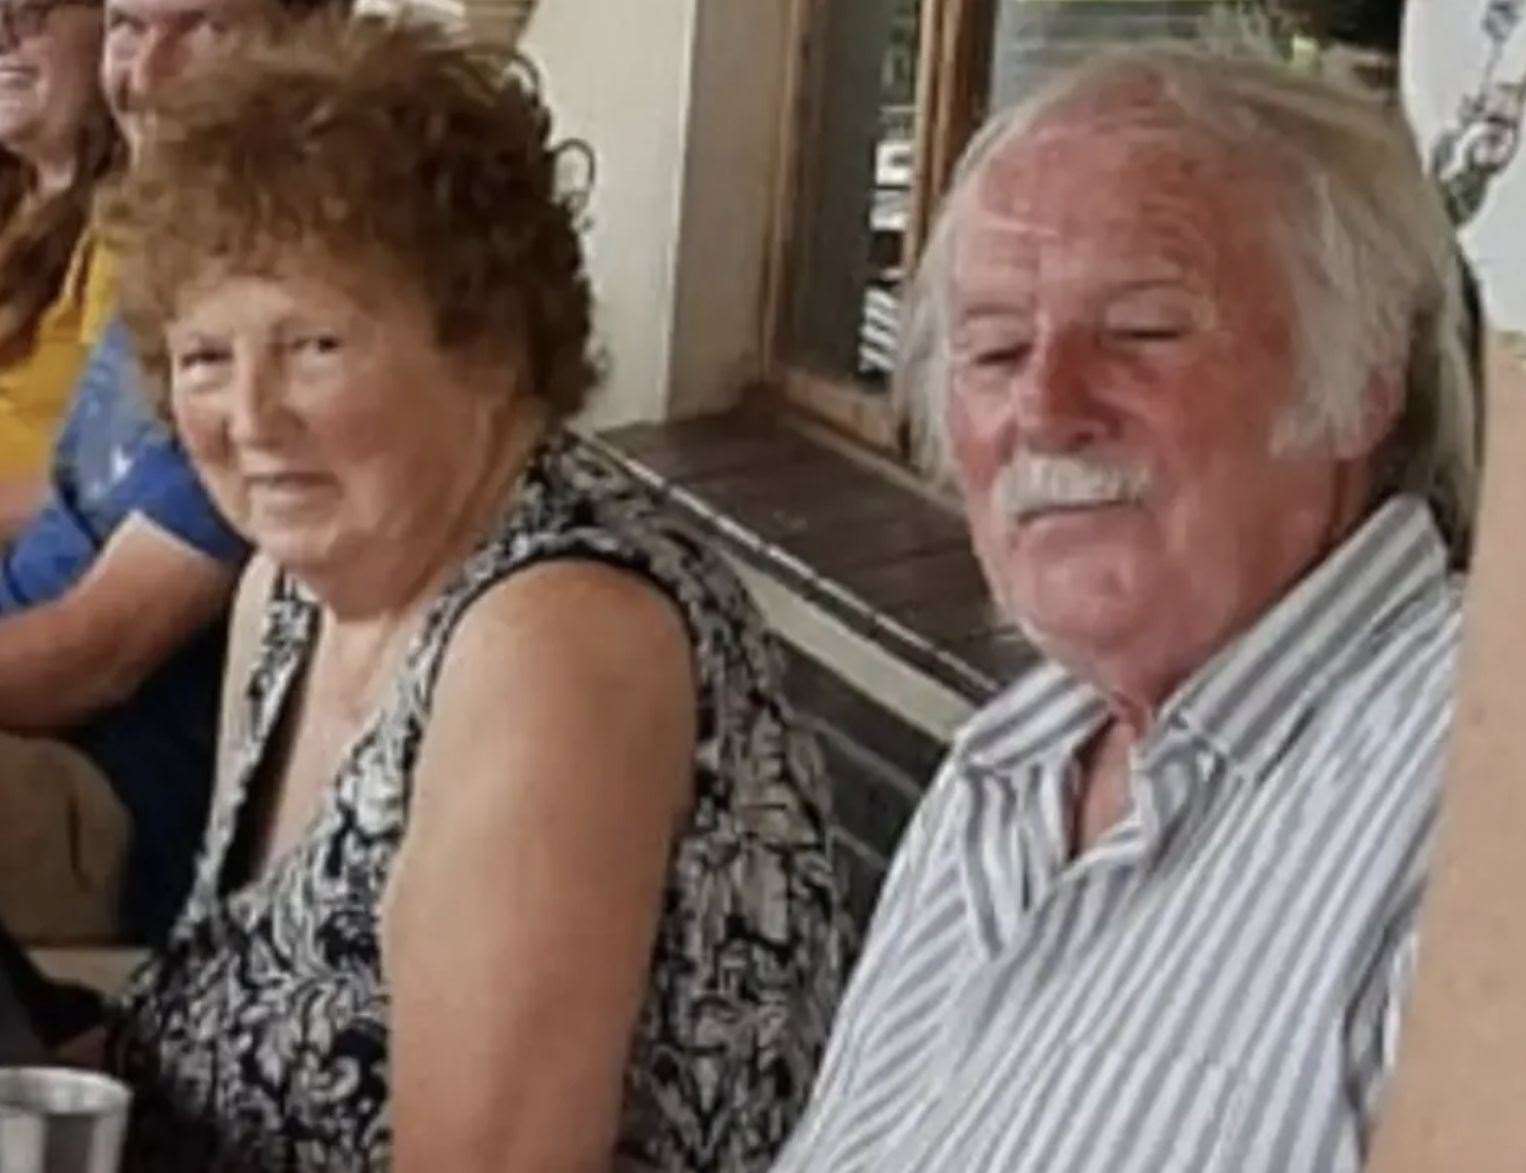 Pensioners Tony and Gillian Dinnis, originally from Tunbridge Wells, were allegedly kidnapped and had their bodies dismembered in South Africa, as reported by Rapport. Picture: Facebook